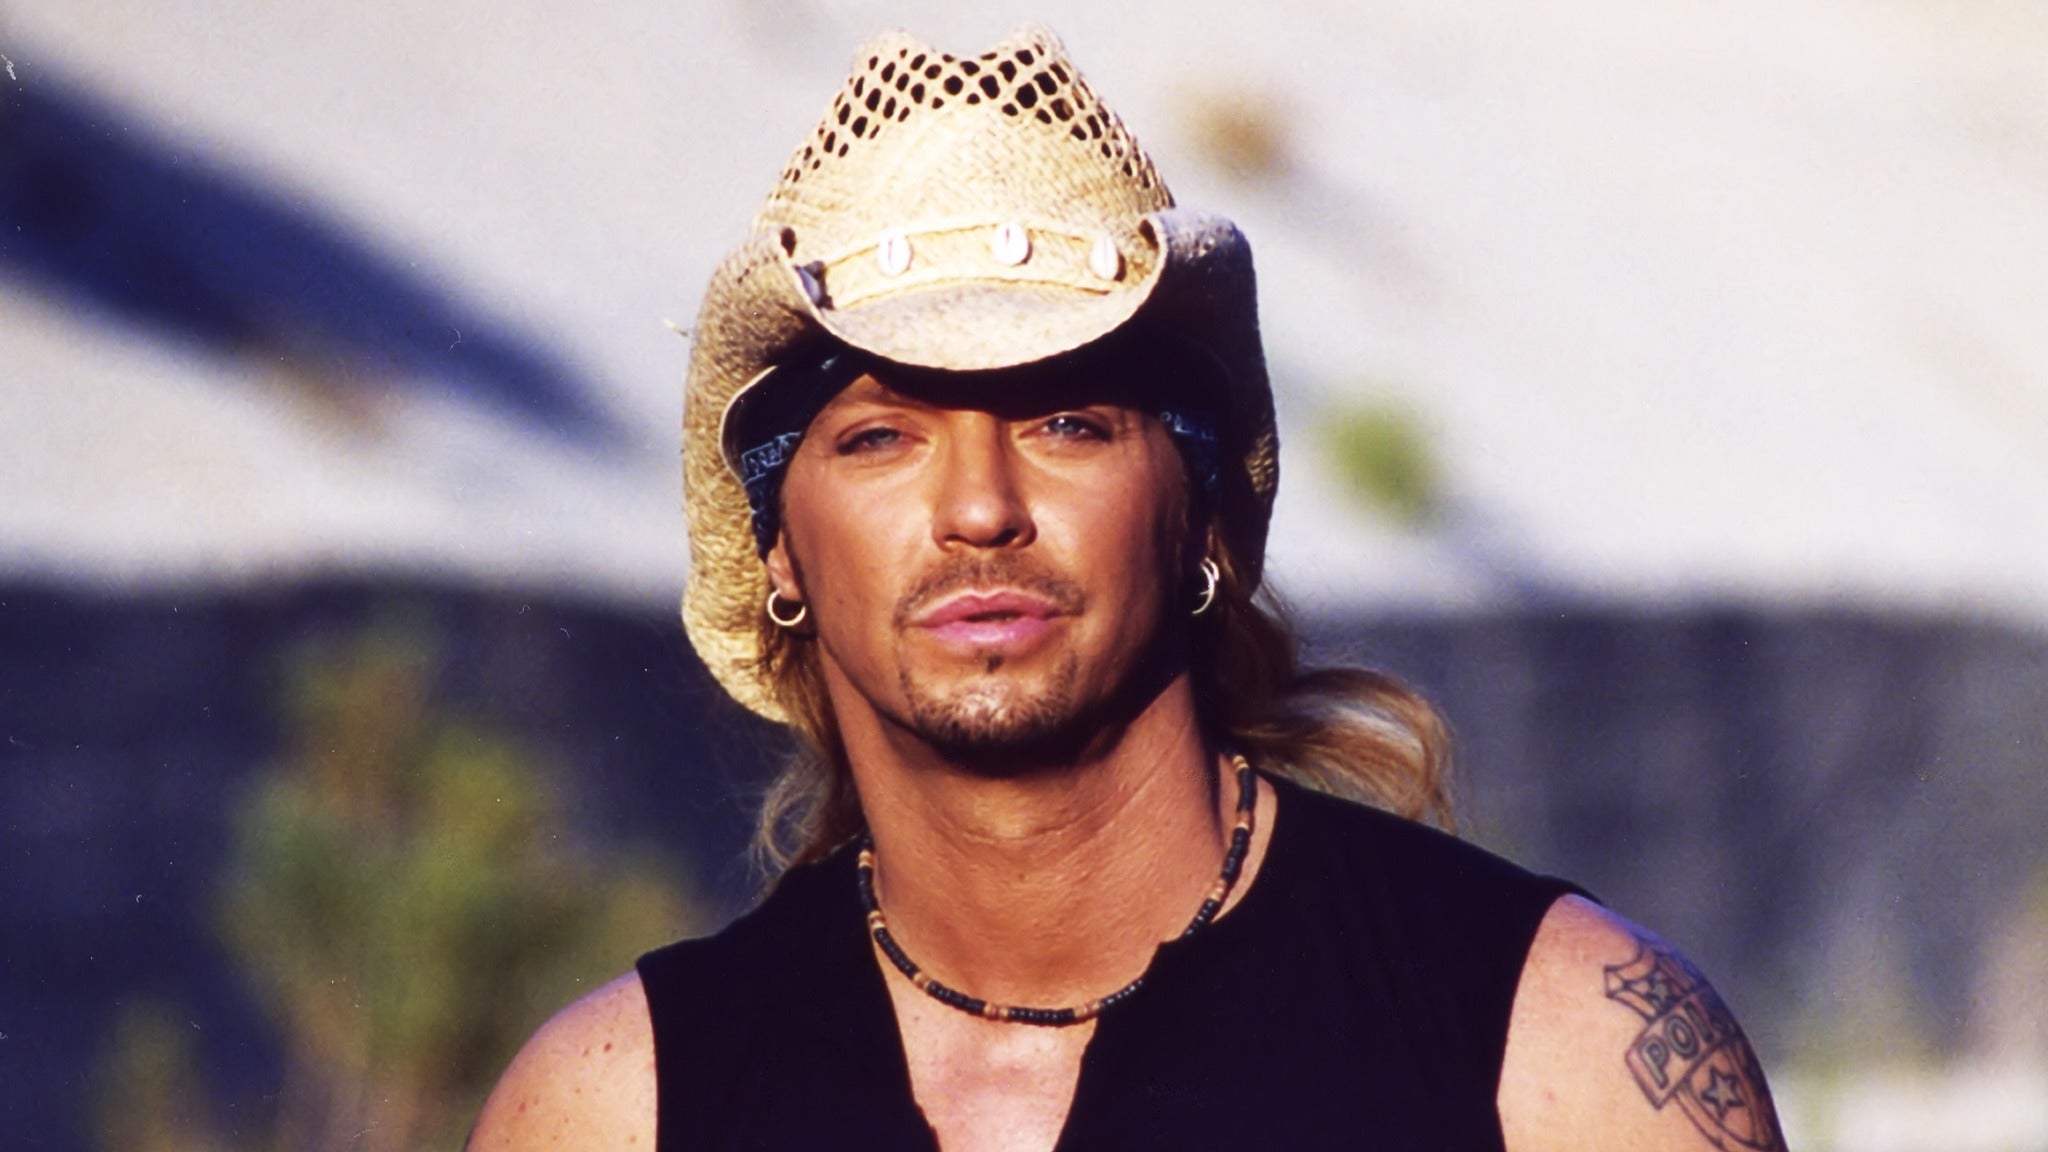 Bret Michaels at Muckleshoot Events Center